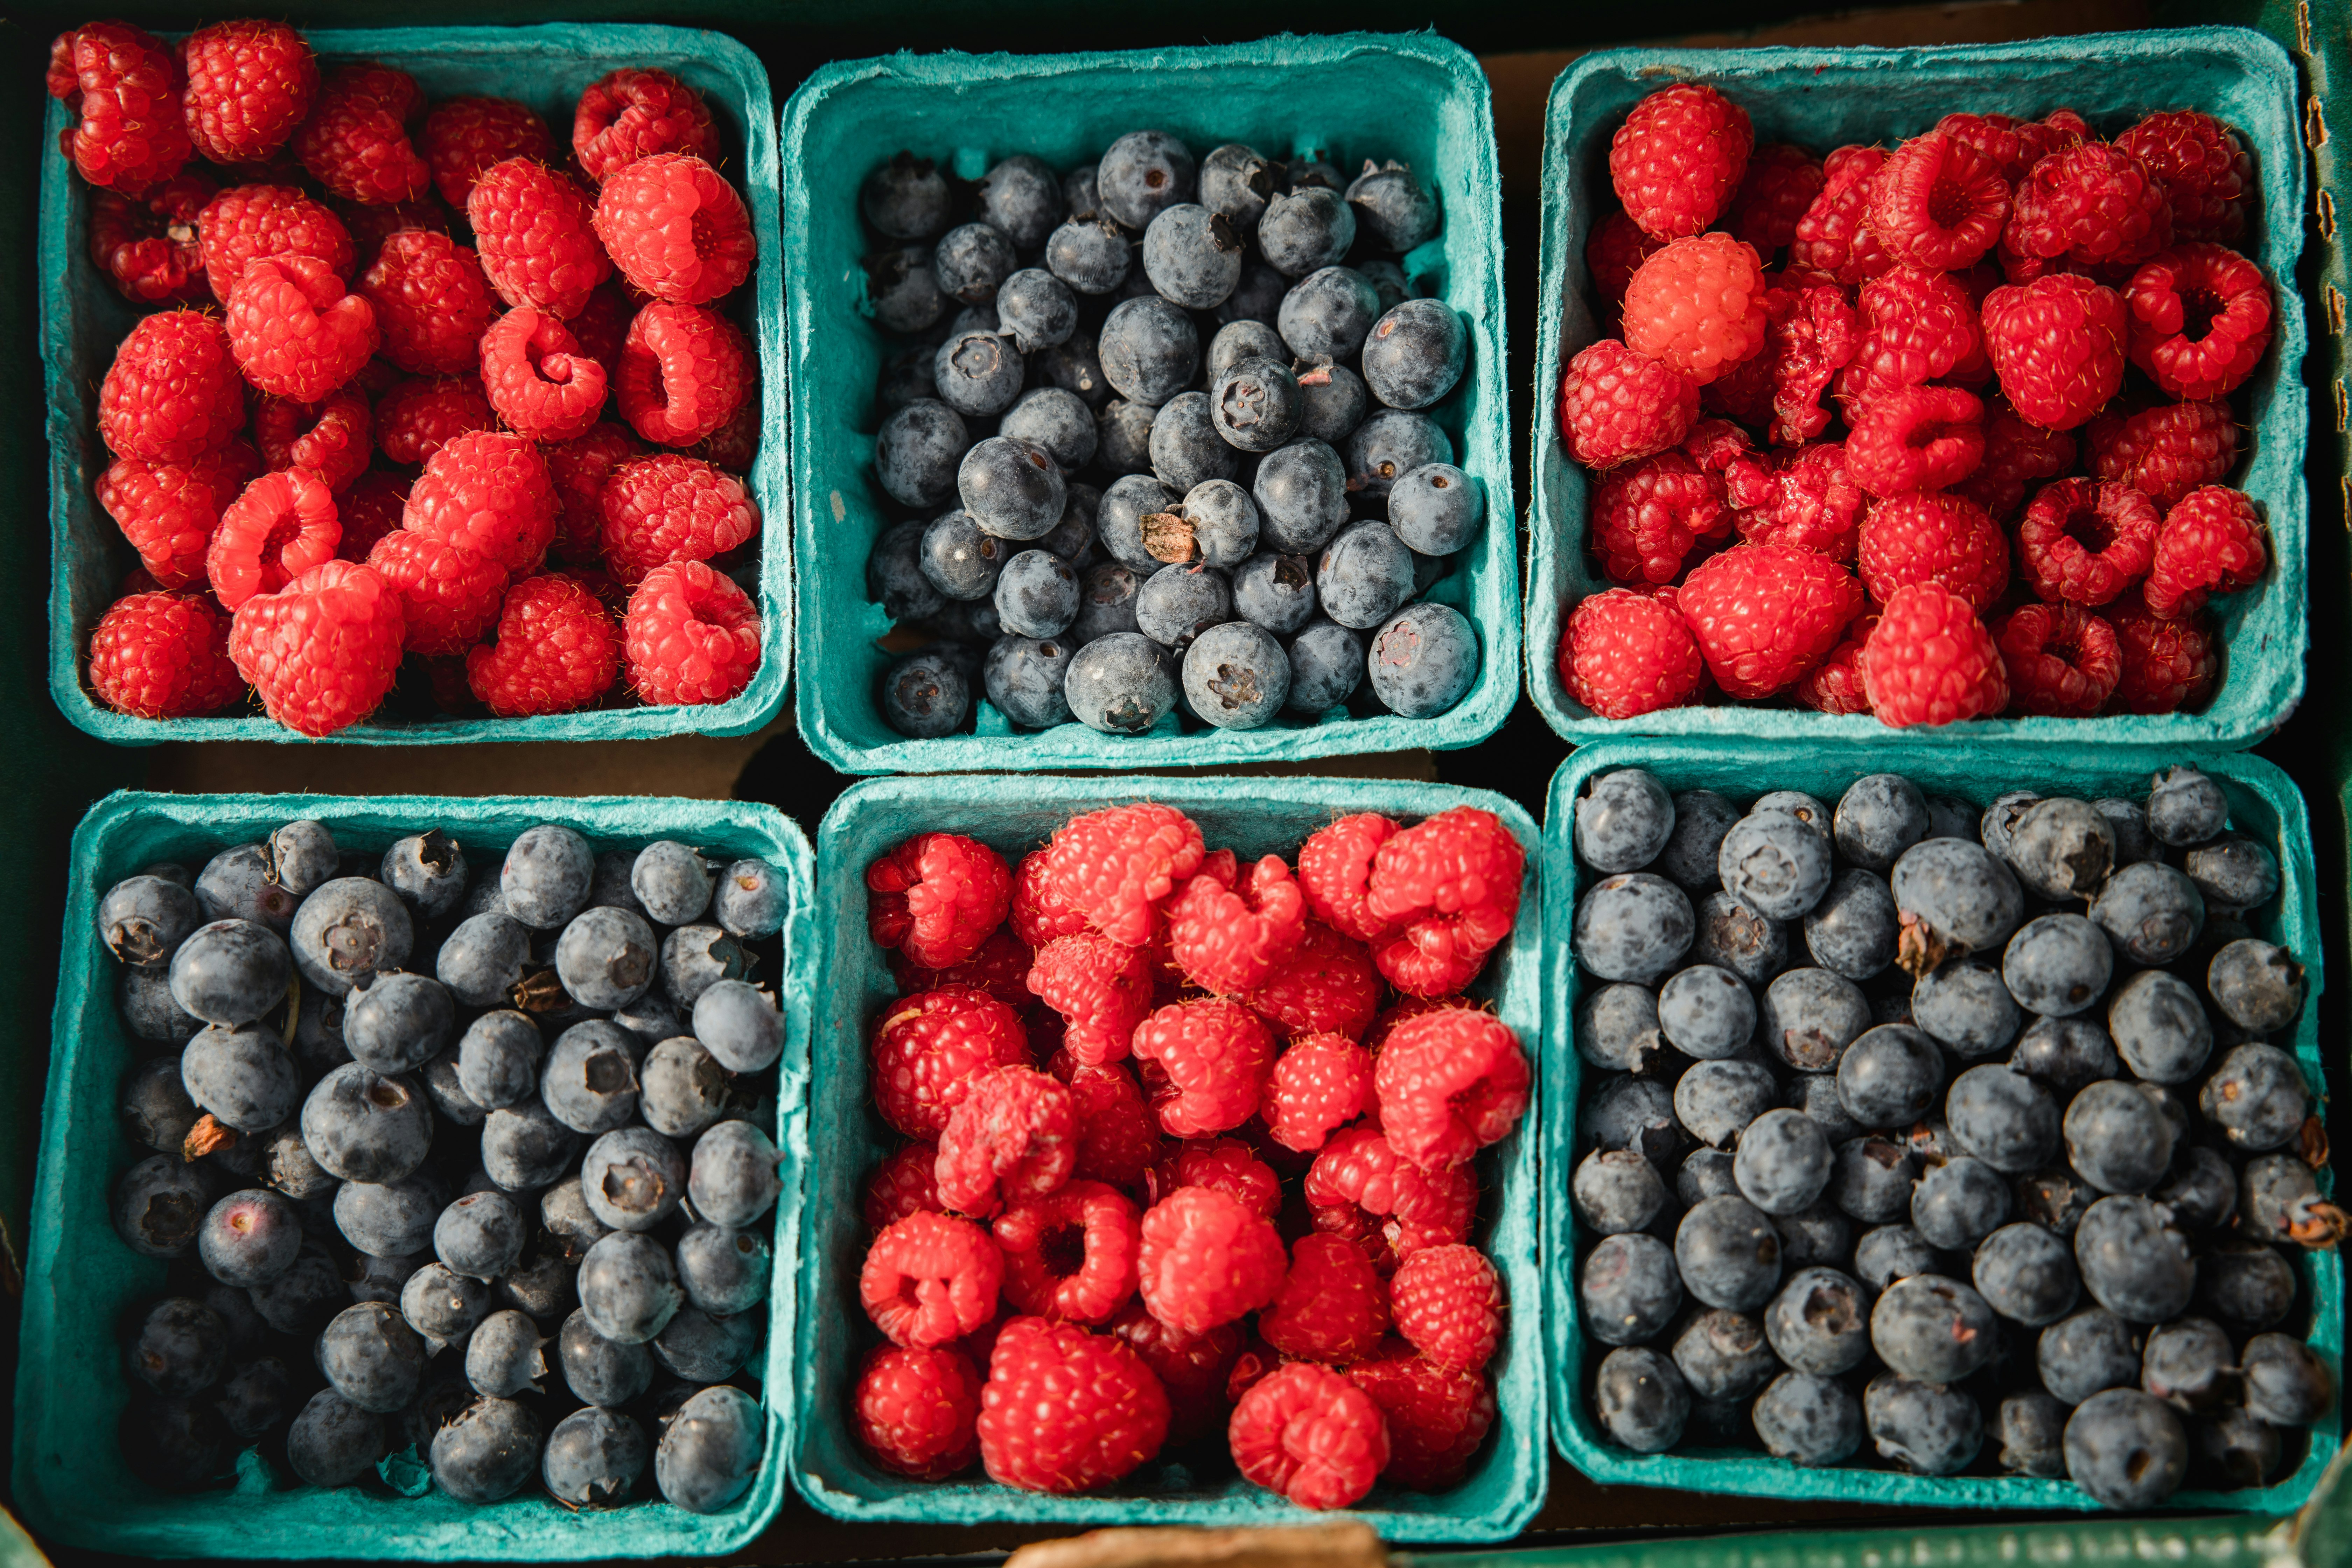 red and black berries in blue plastic crate